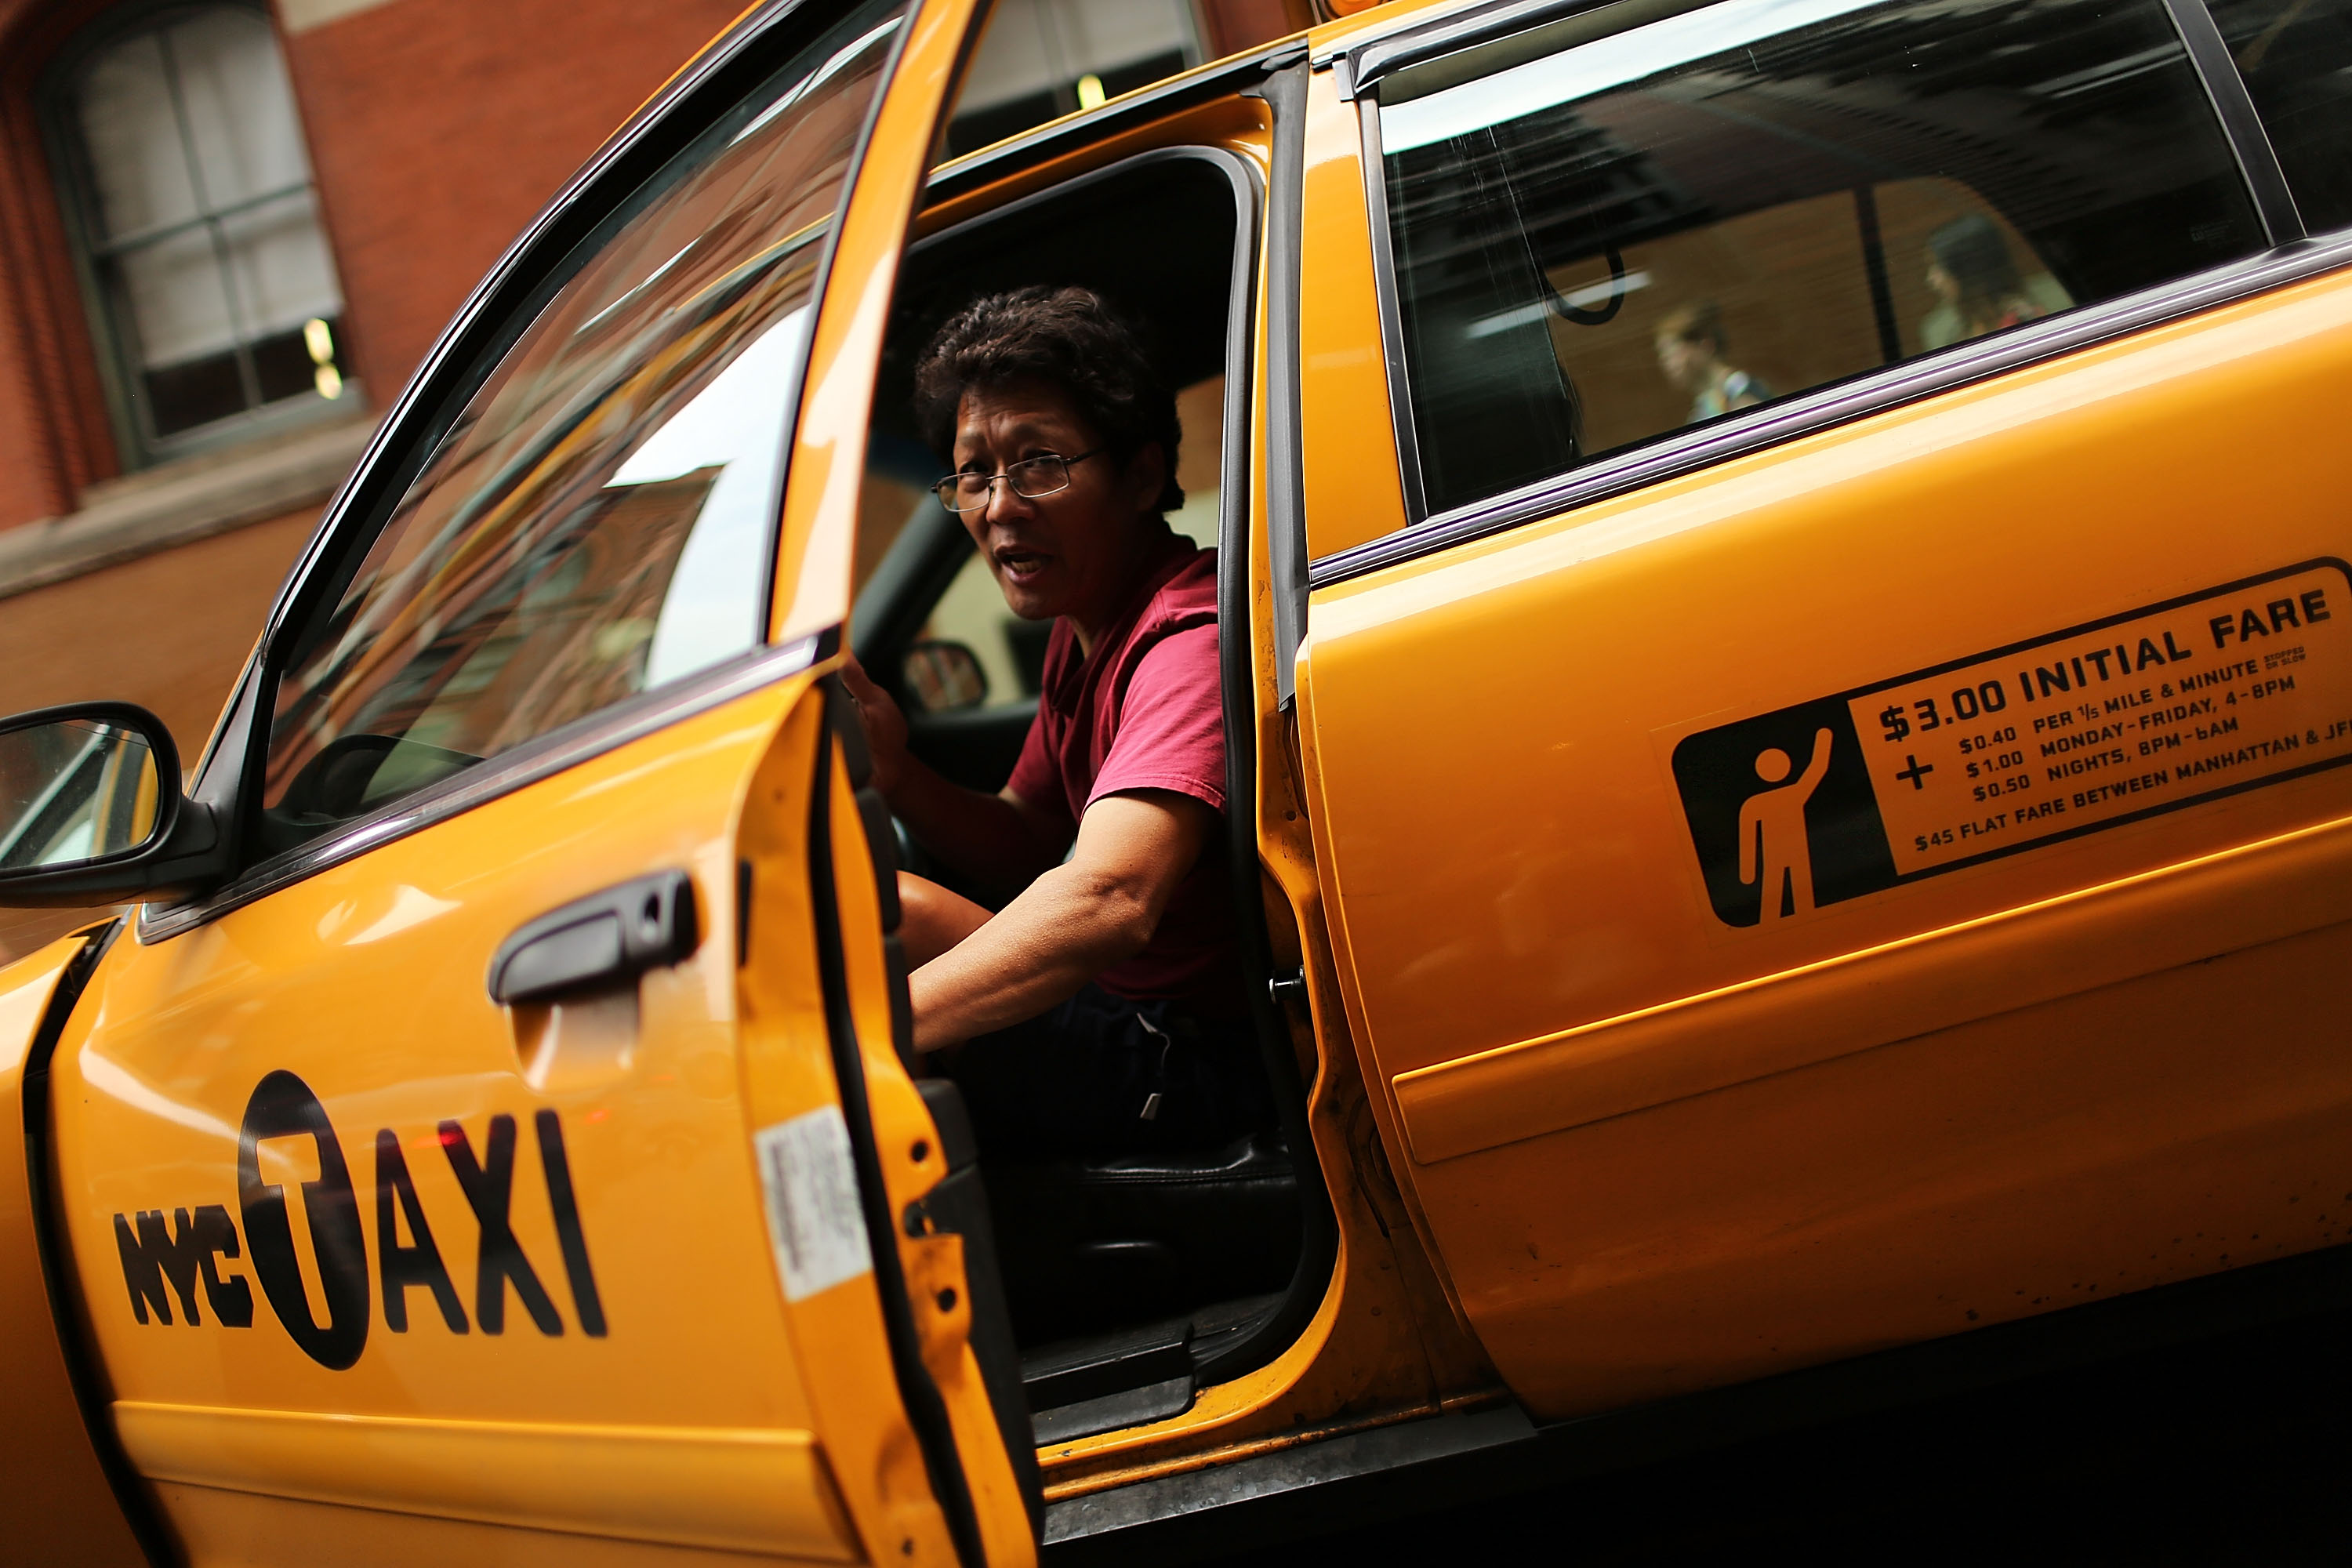 A taxi driver pauses in his vehicle on September 4, 2012 in New York City. (Spencer Platt&mdash;Getty Images)